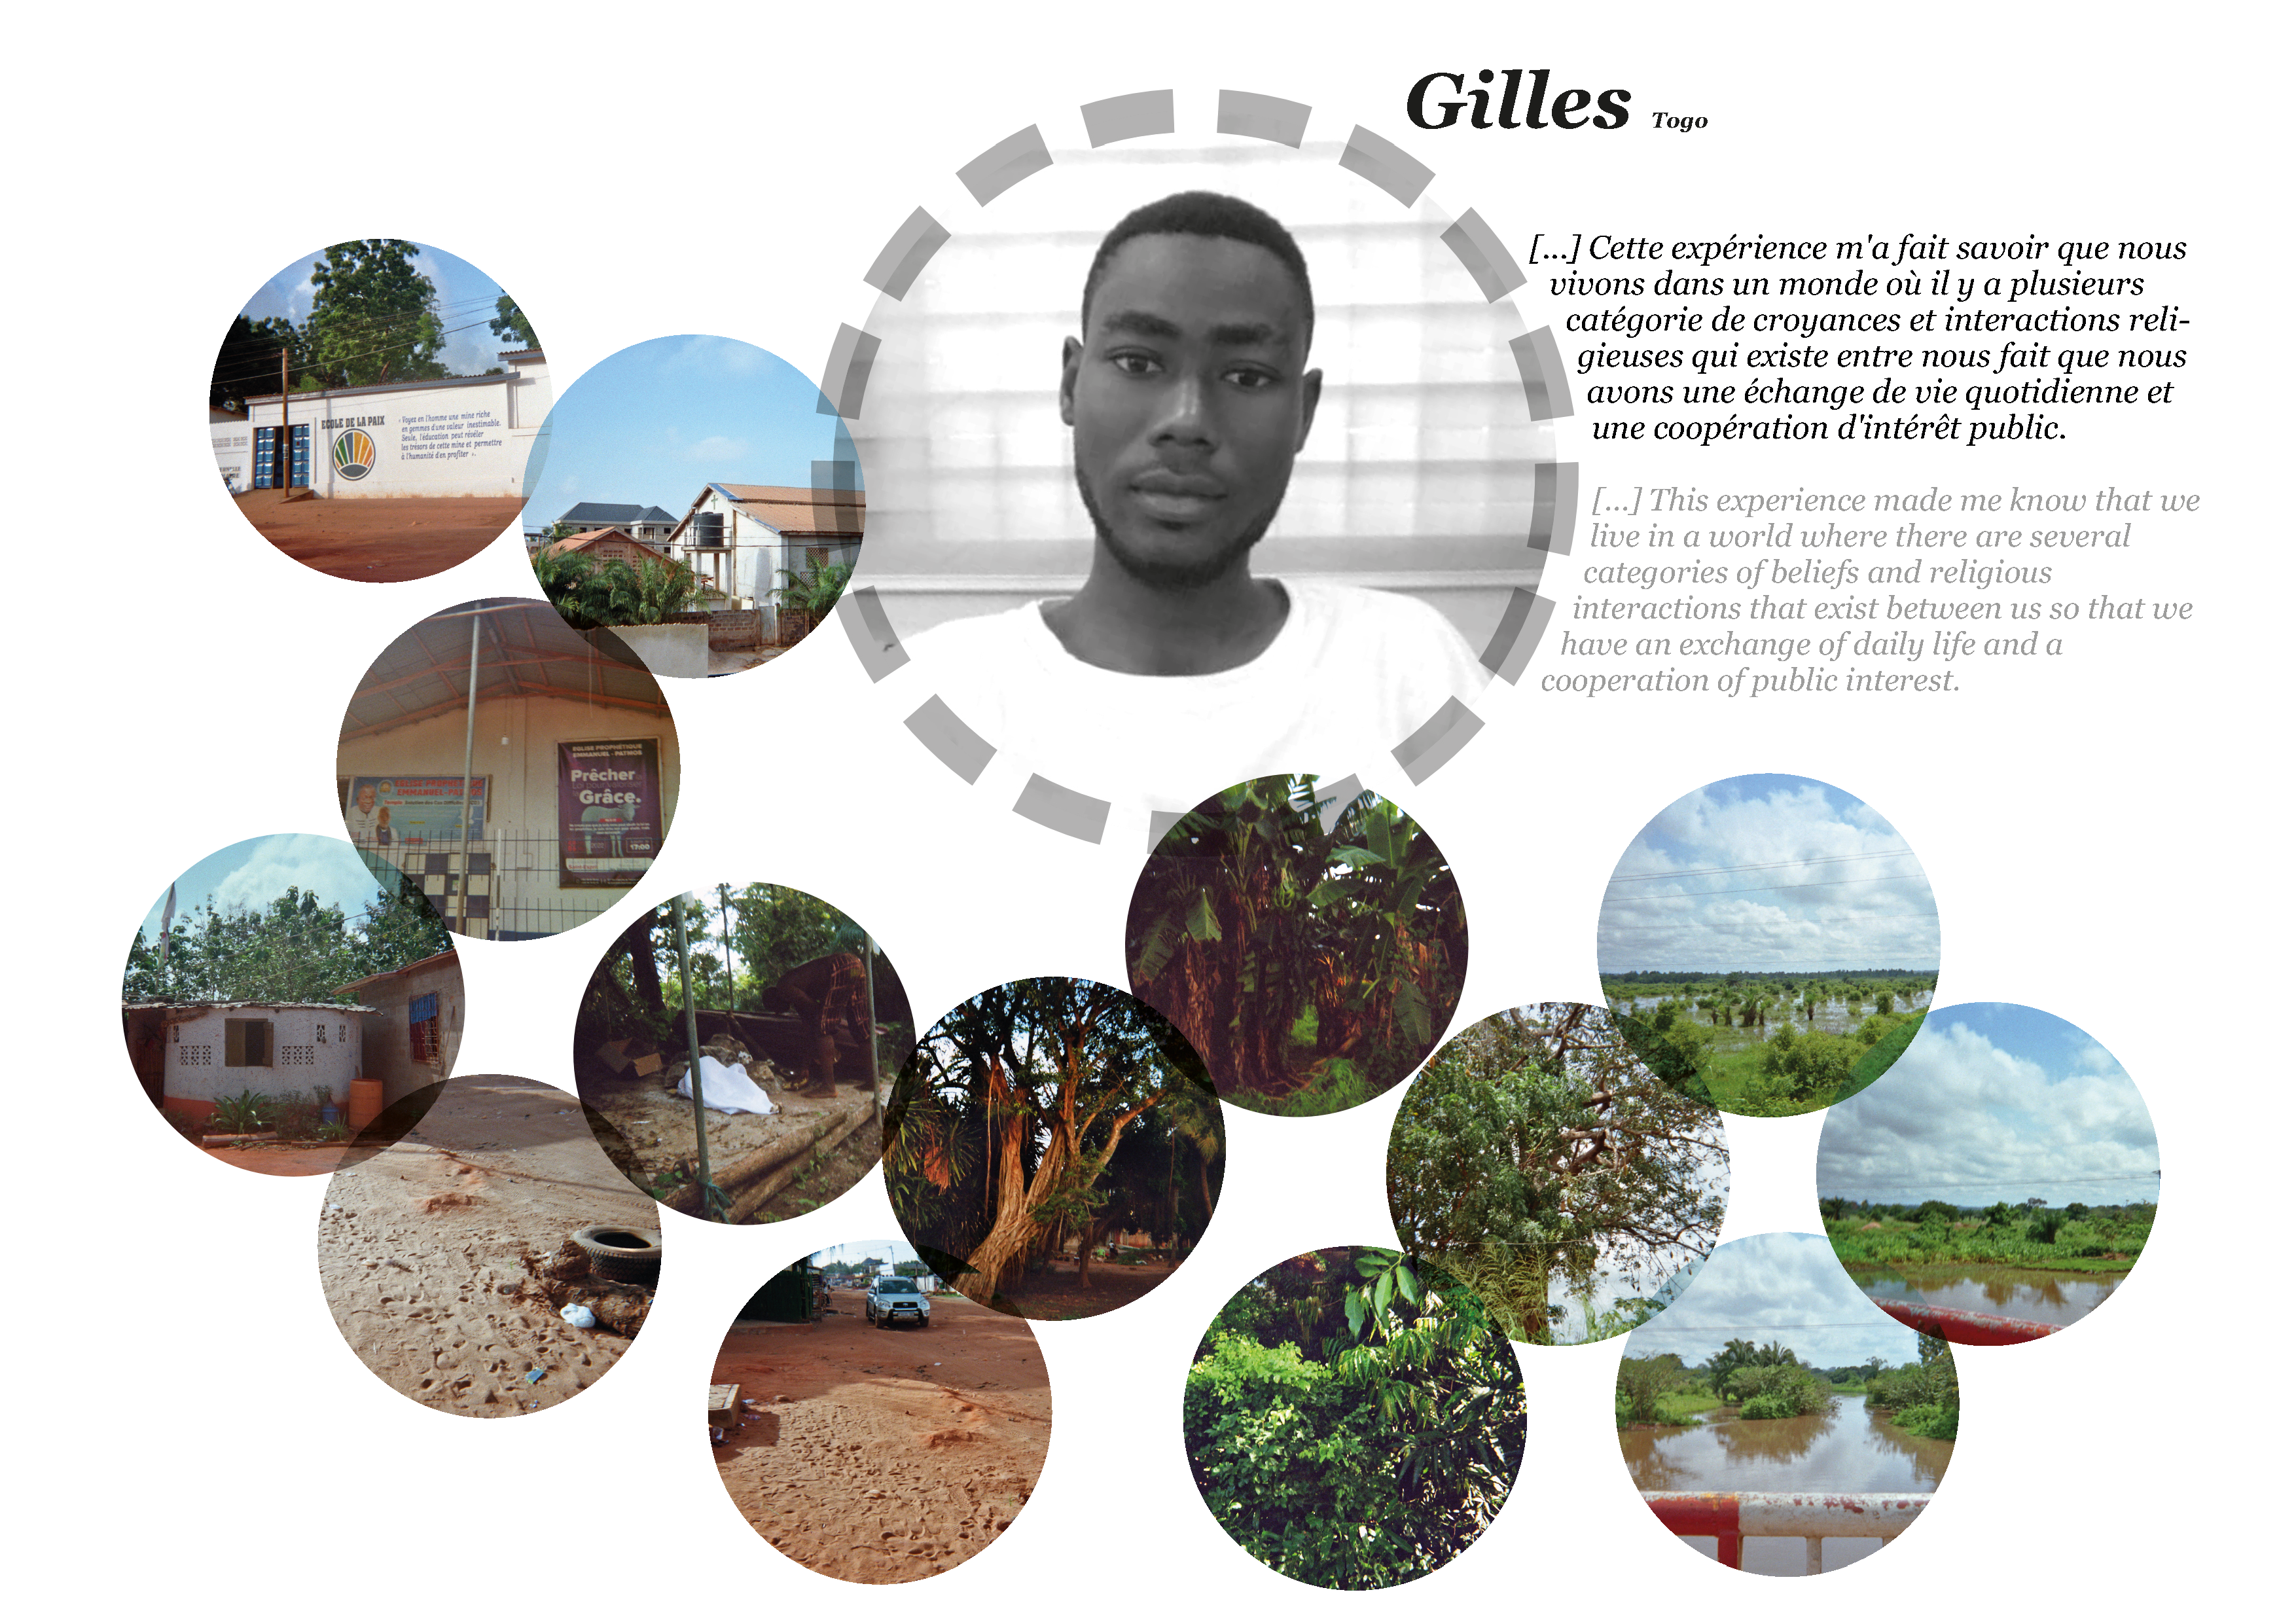 Collage of pictures of religion and peace by Gilles in Togo